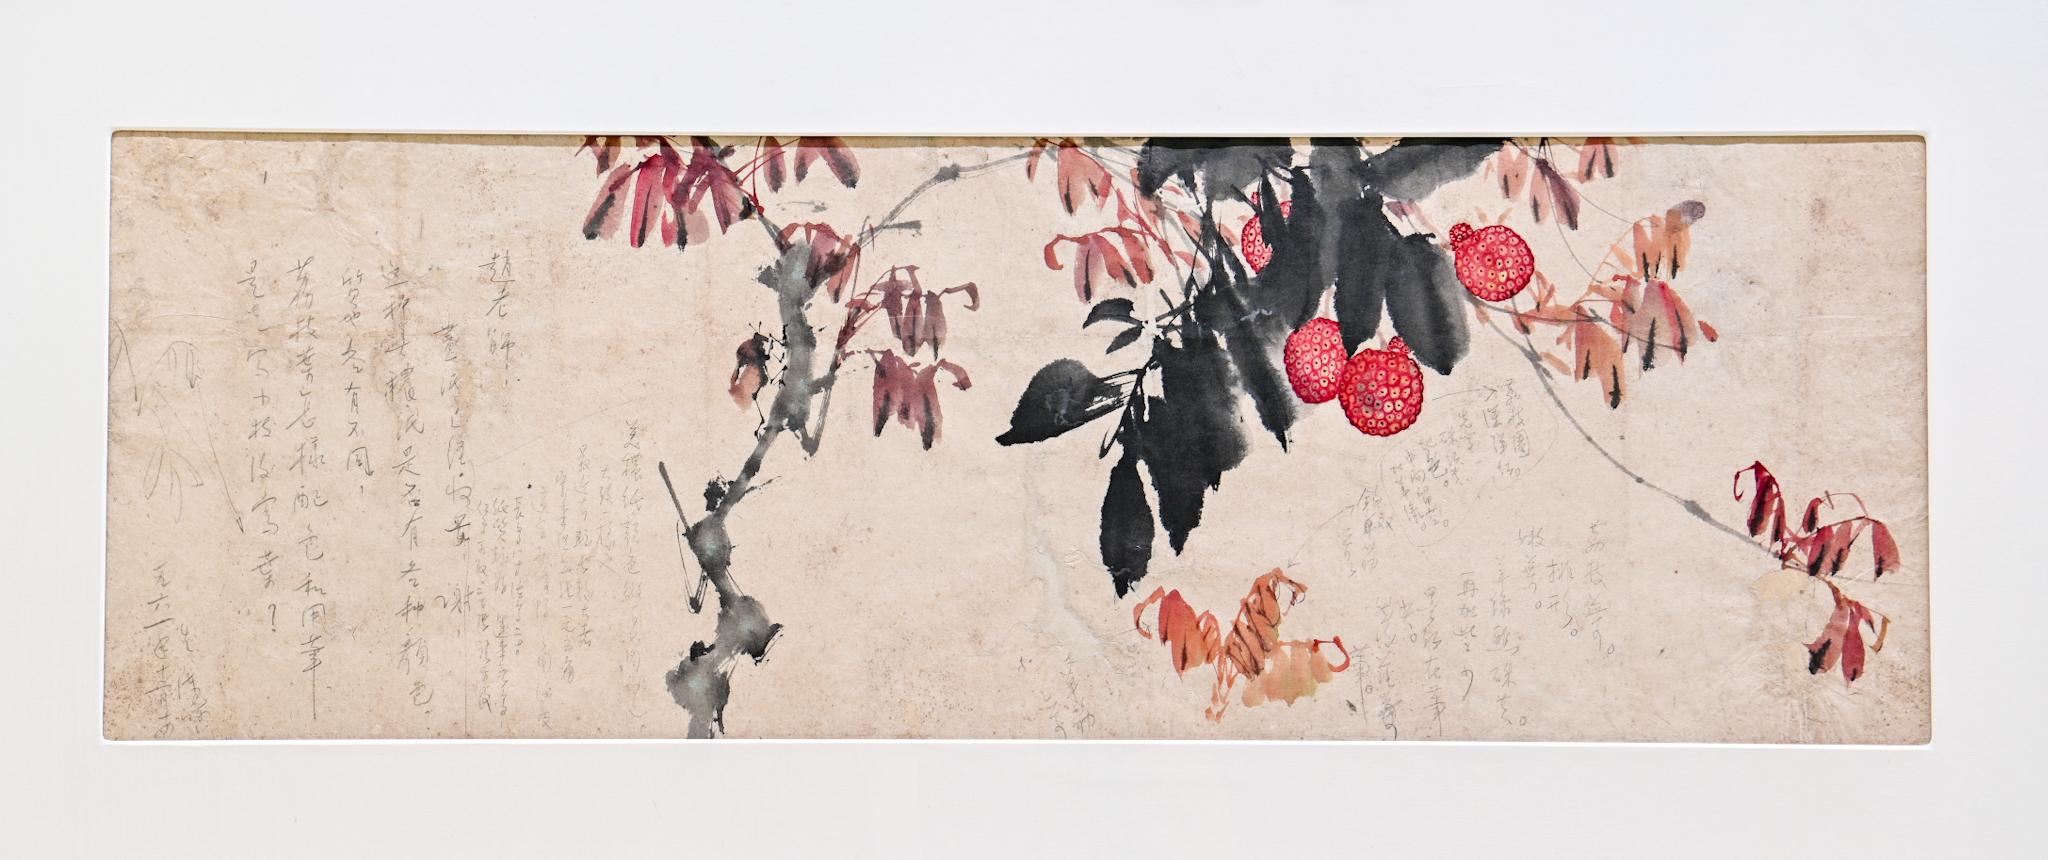 The exhibition "From a Distance: Art Dialogues between Chao Shao-an and Chin Kee" will be open to the public from tomorrow (September 21) at the Hong Kong Heritage Museum. Picture shows Chin Kee's painting assignment "Lychee", with questions and answers between Chao Shao-an and Chin.